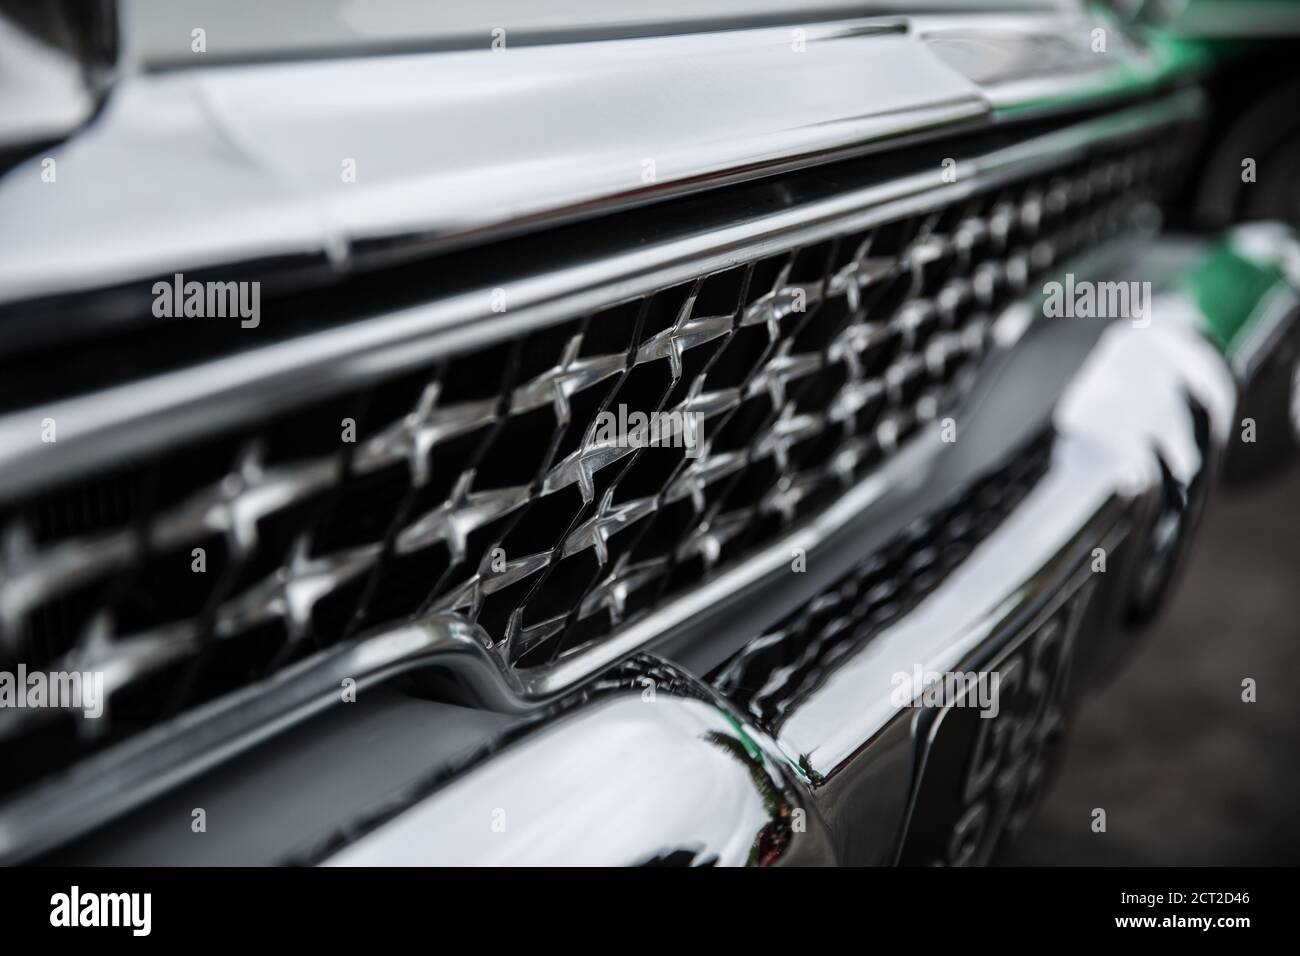 1959 Ford Galaxie chrome grill details. Stock Photo